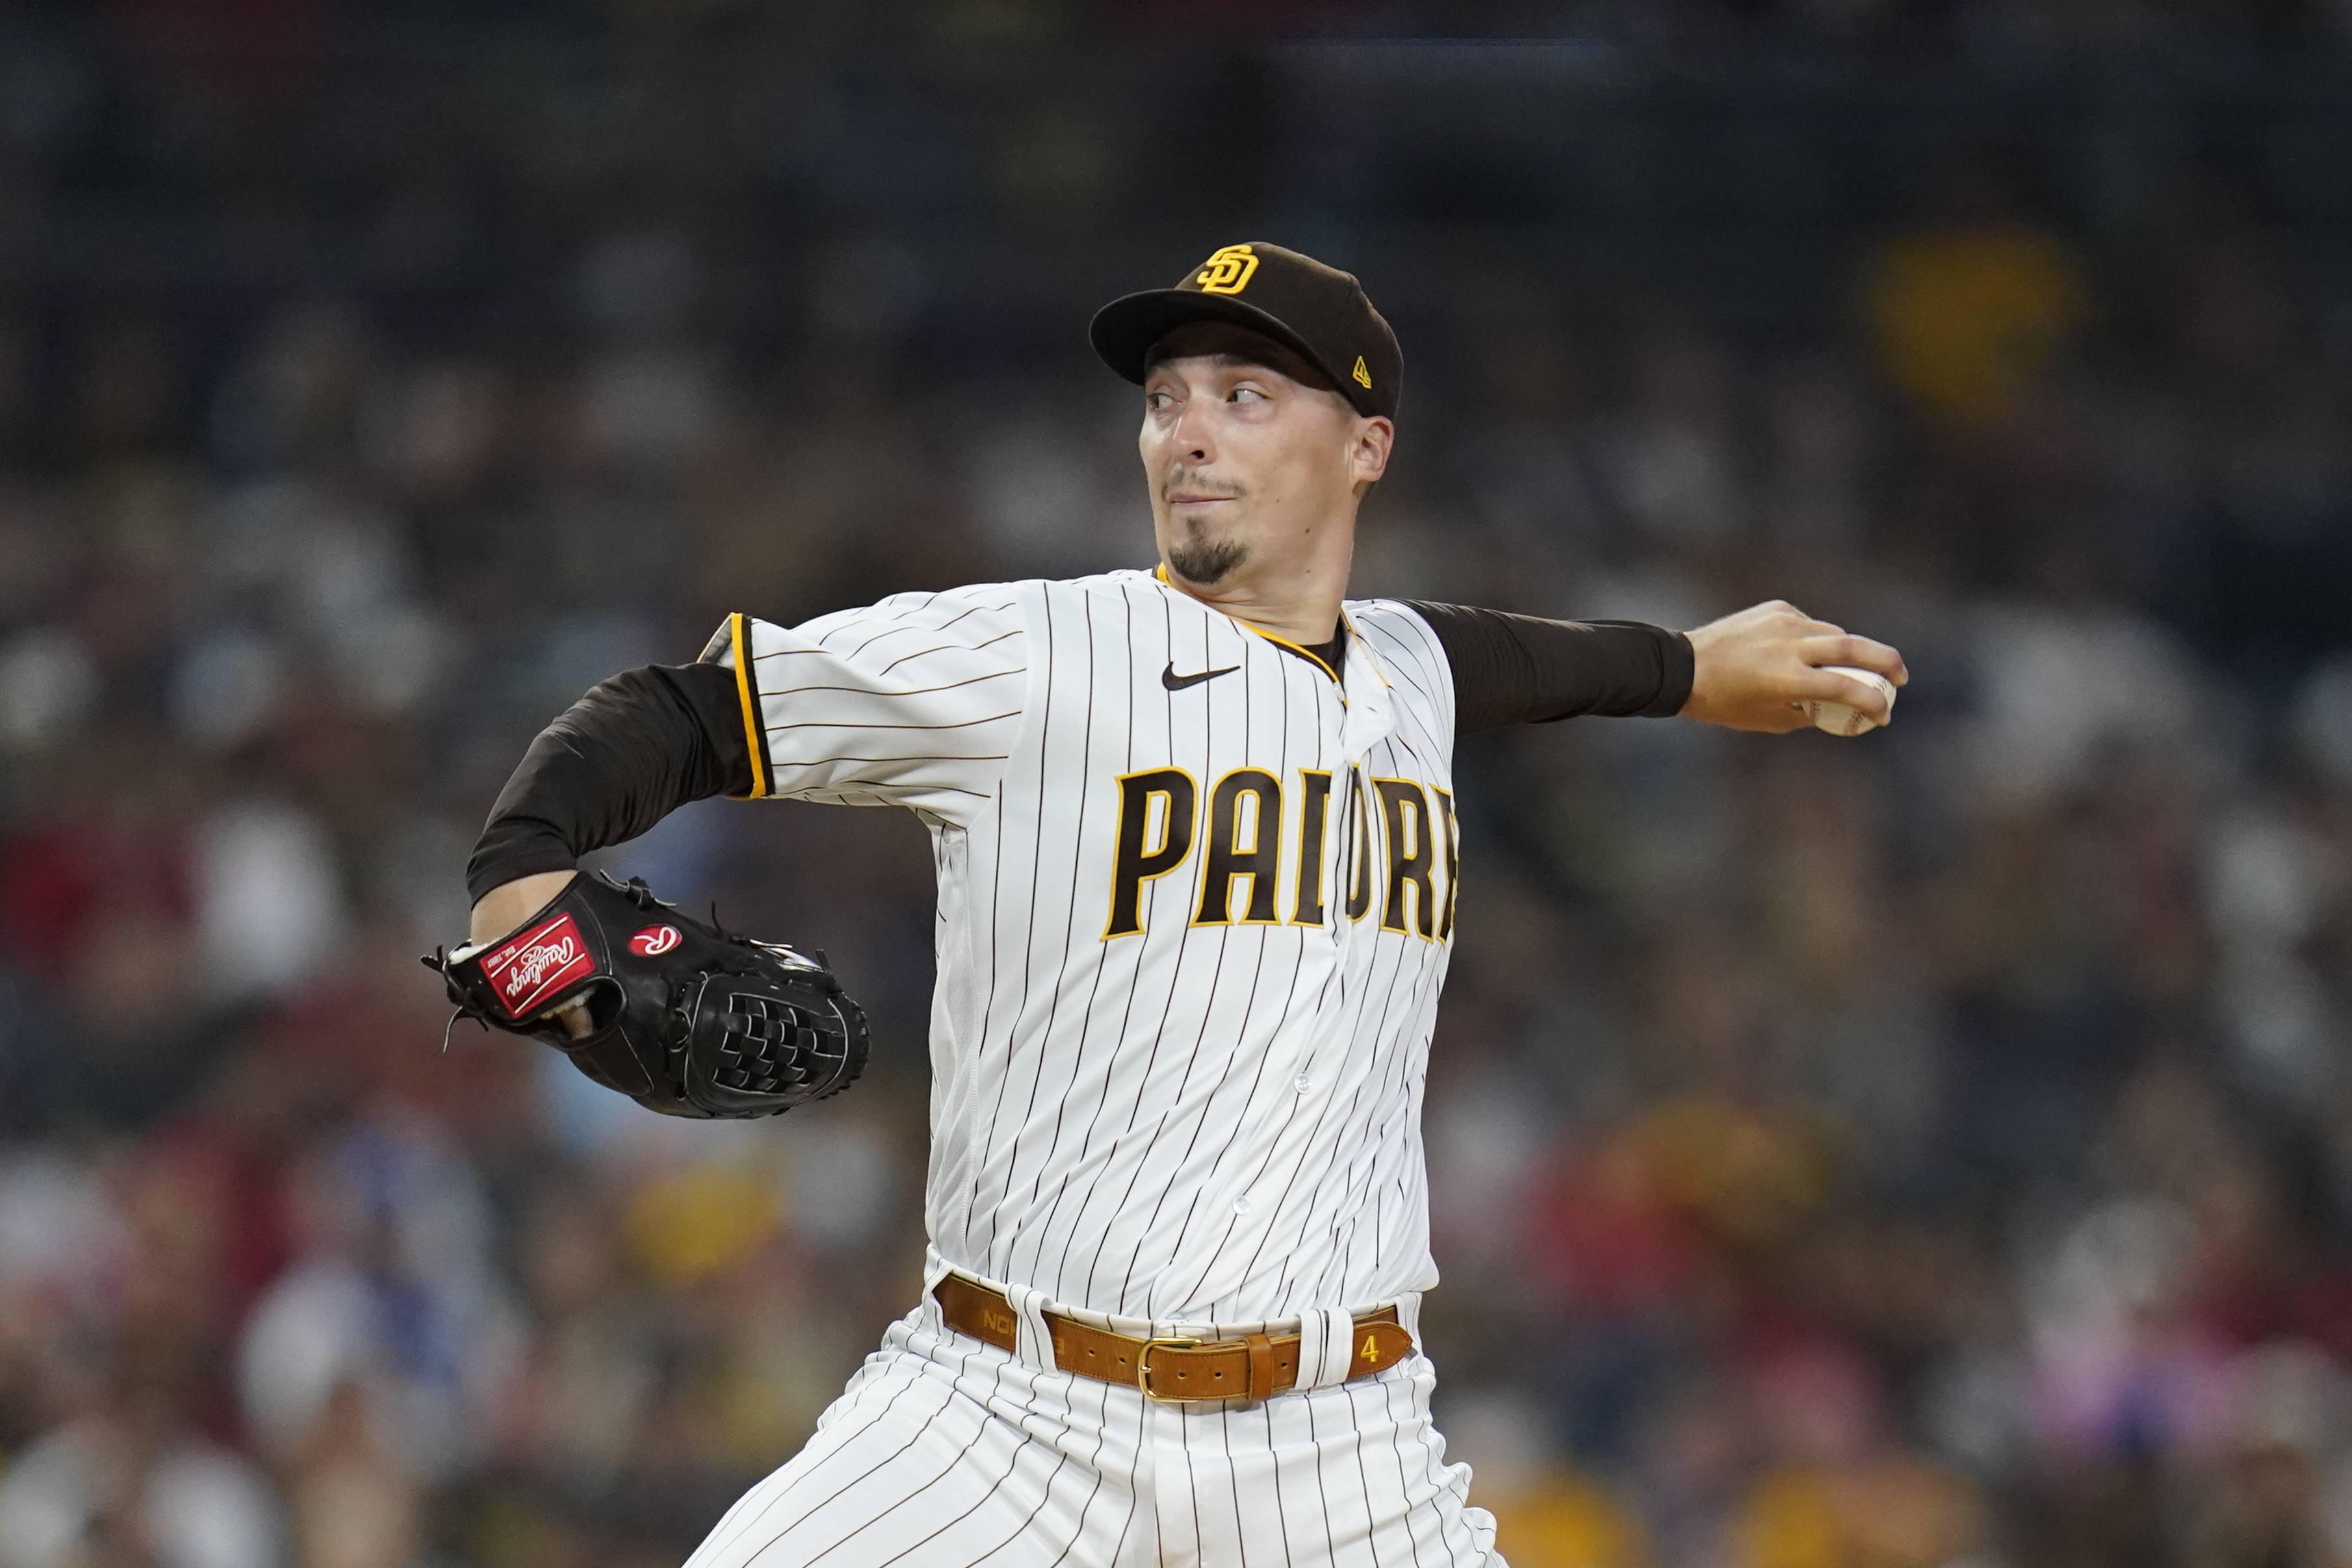 Blake Snell dominates as San Diego Padres avoid sweep to Giants